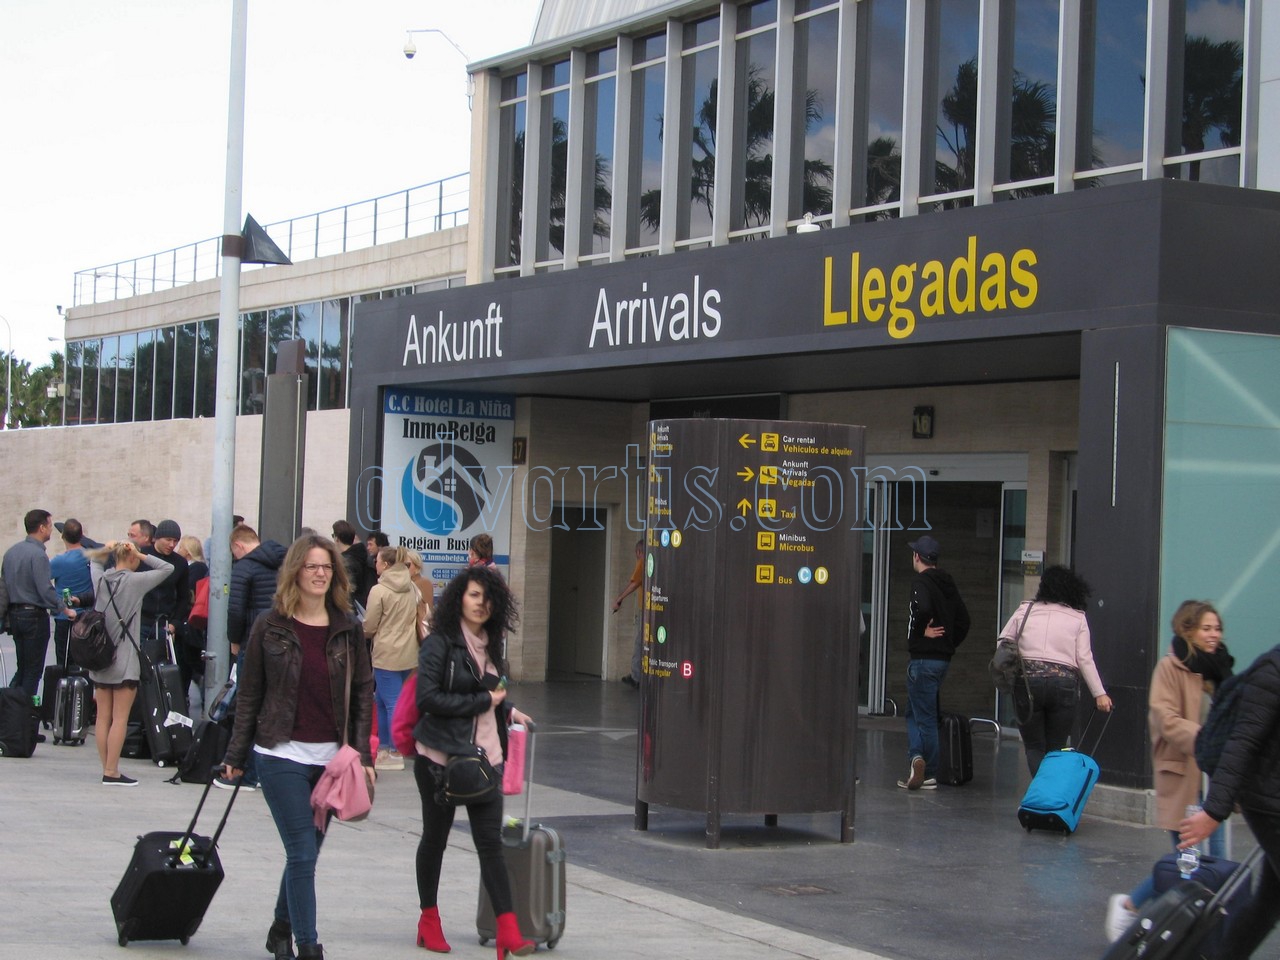 Tenerife south airport Arrivals